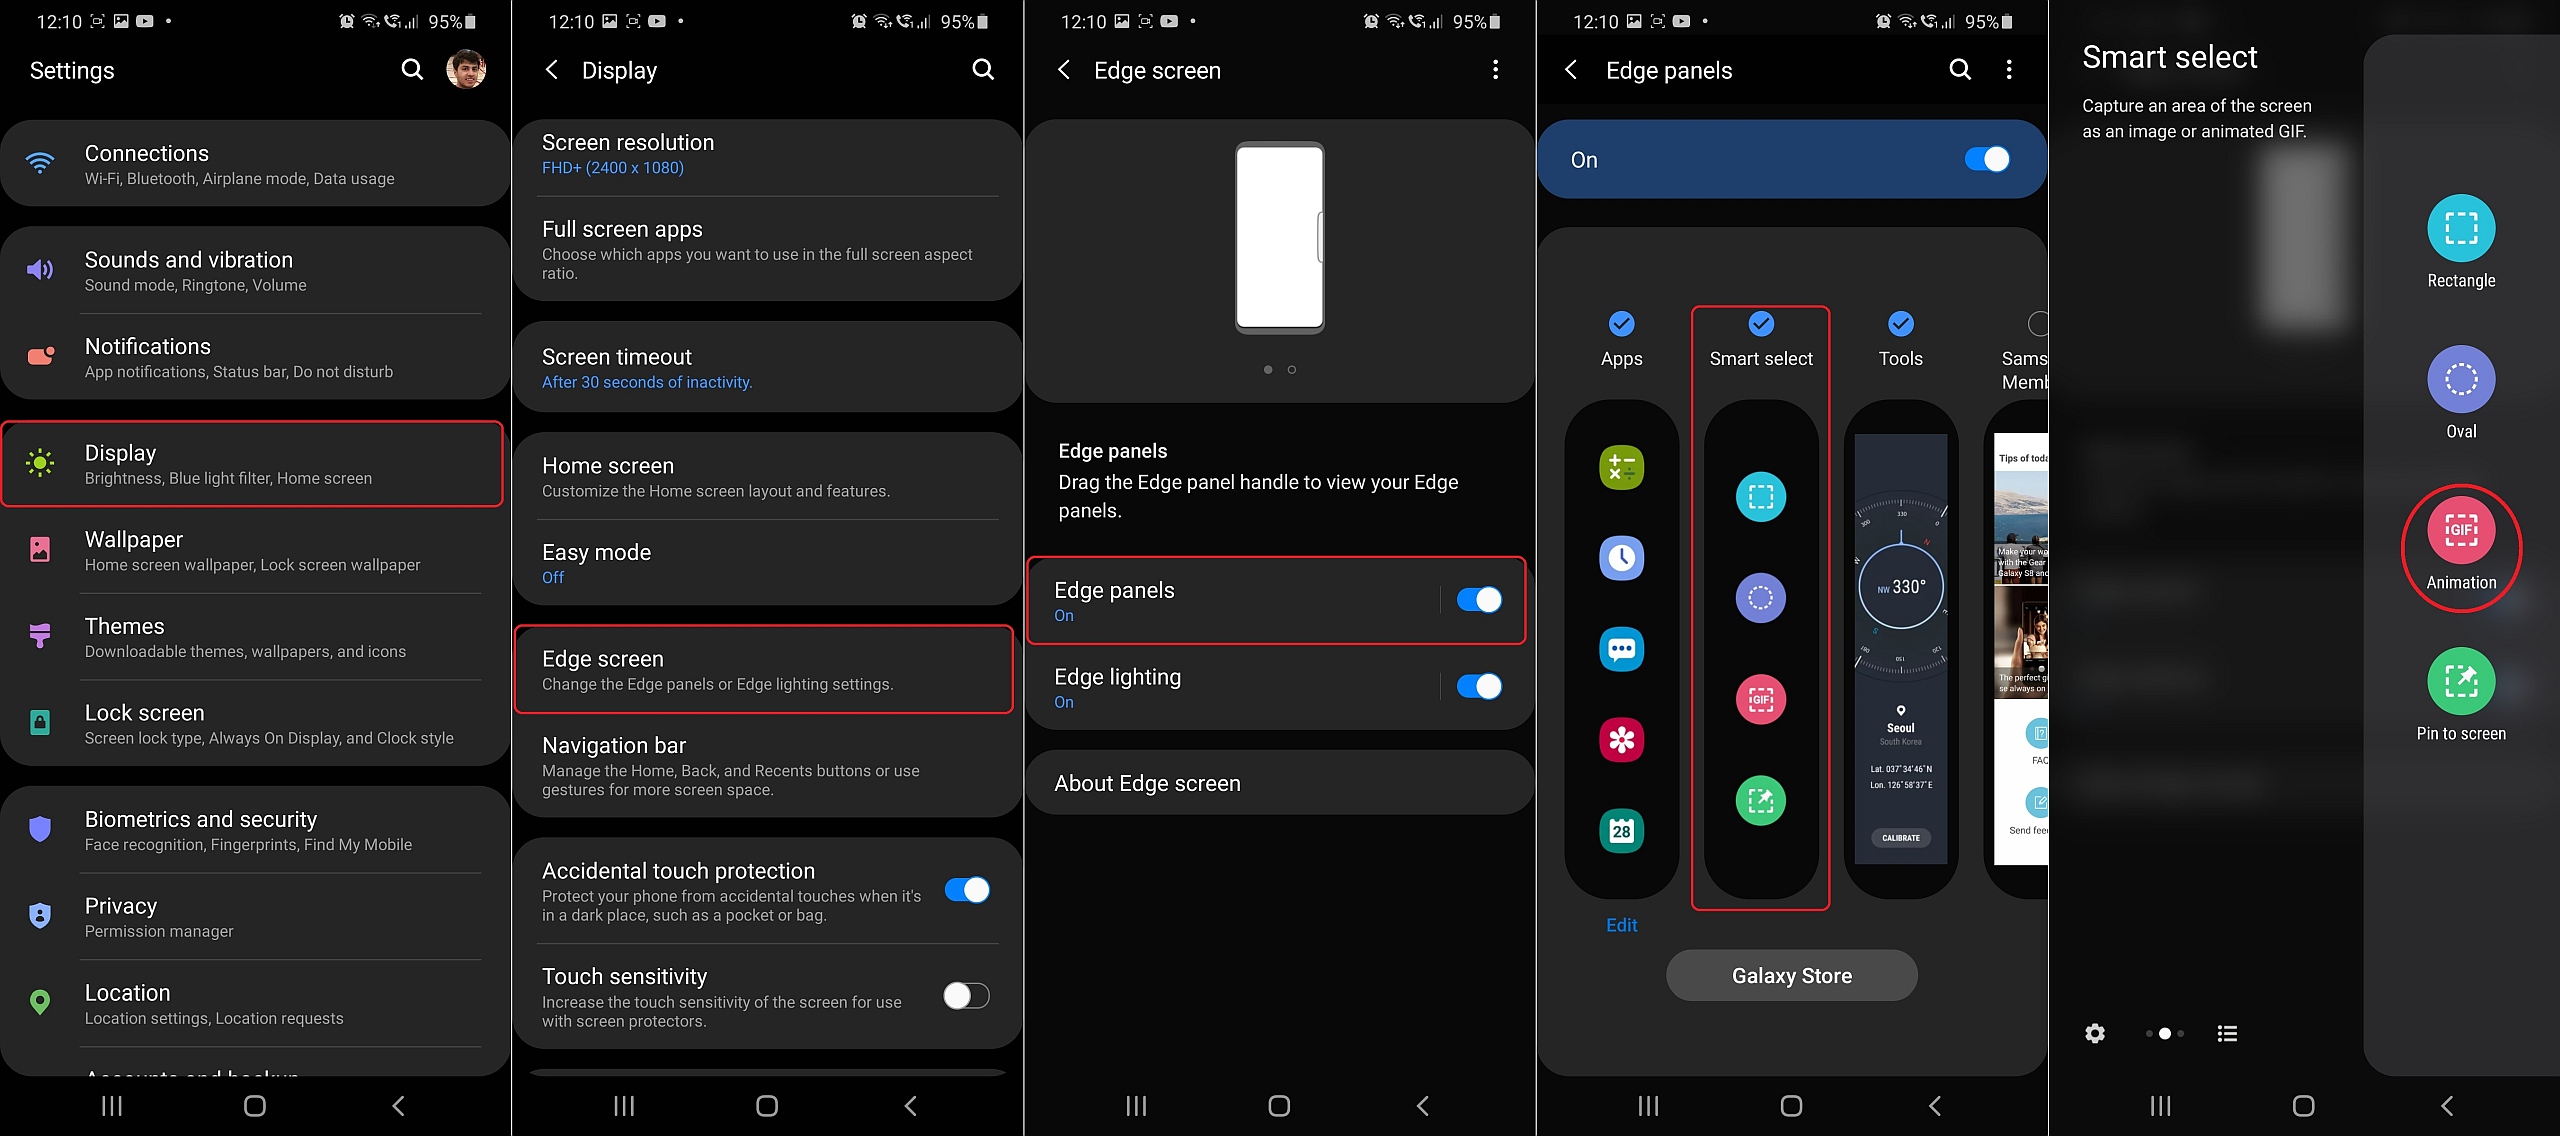 Here's every method for taking screenshots on the Galaxy S20 - SamMobile